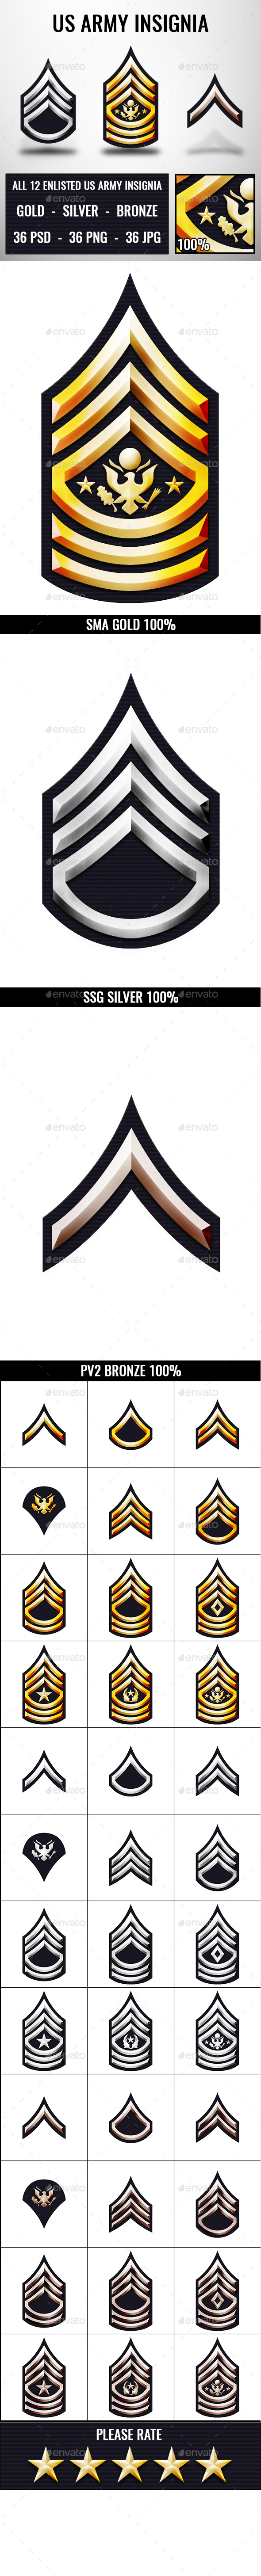 Us rank and army insignia Ranks and